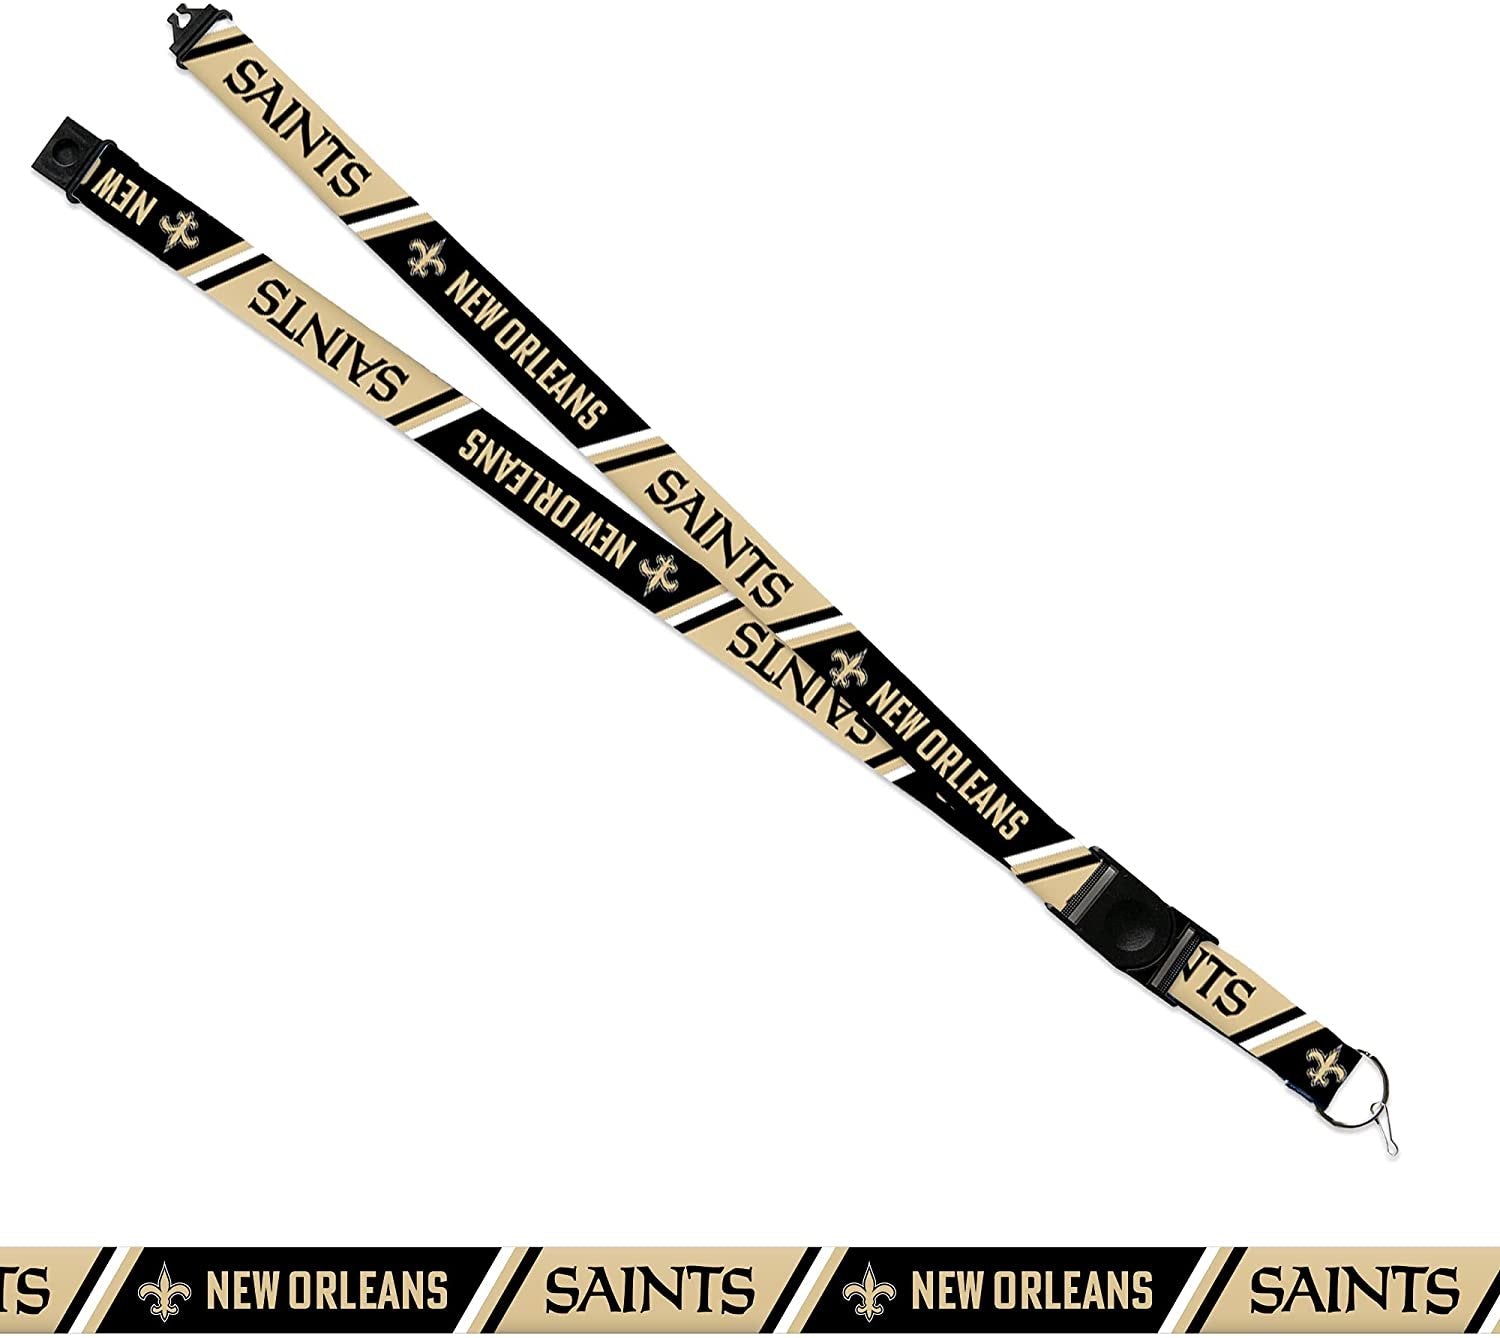 New Orleans Saints Lanyard Keychain Double Sided Breakaway Safety Design Adult 18 Inch